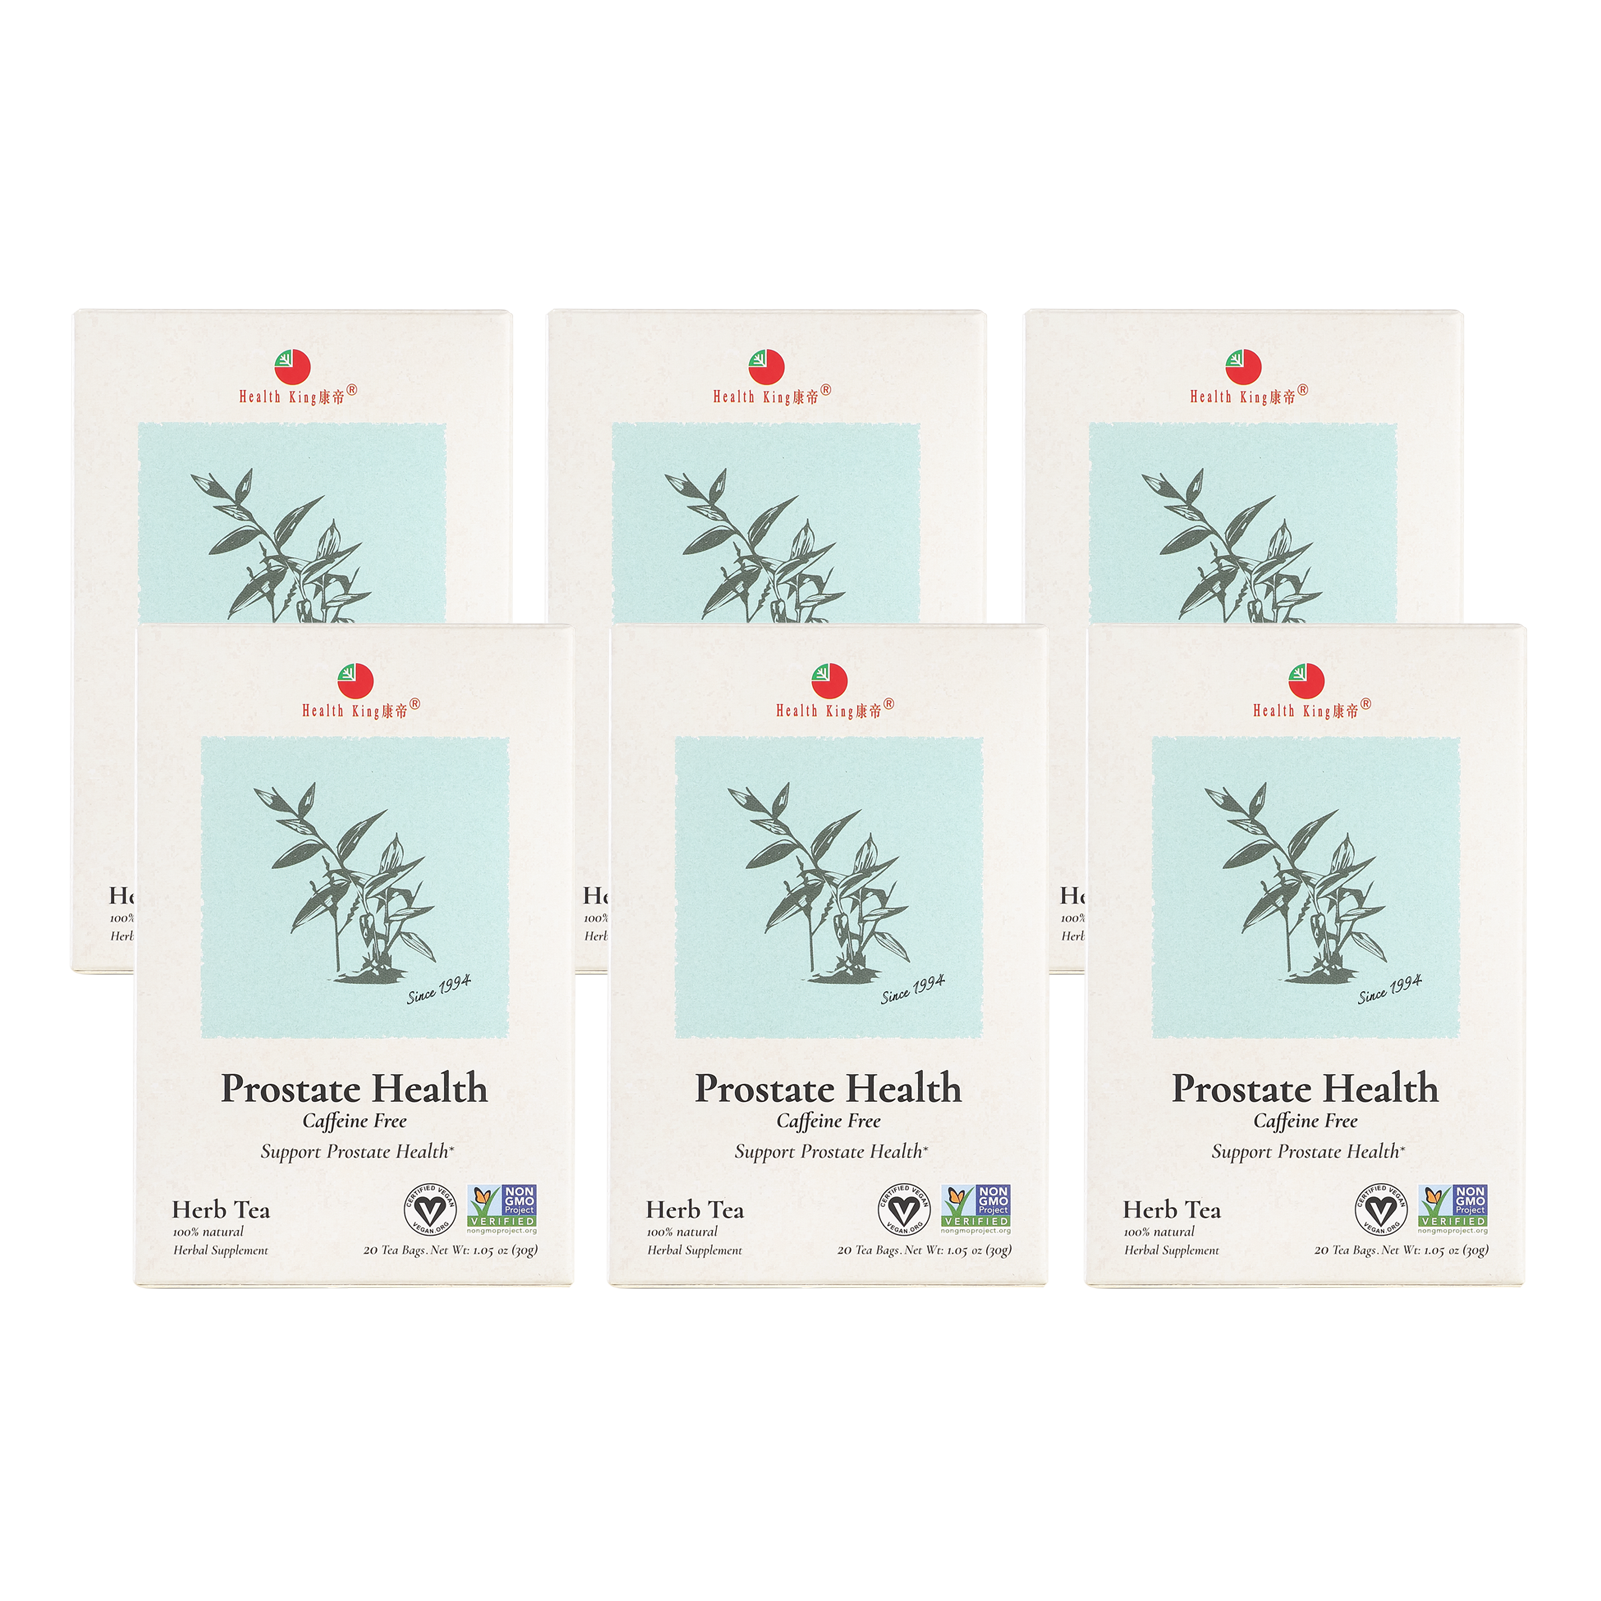 Six-pack of Prostate Health Herb Tea for prostate support